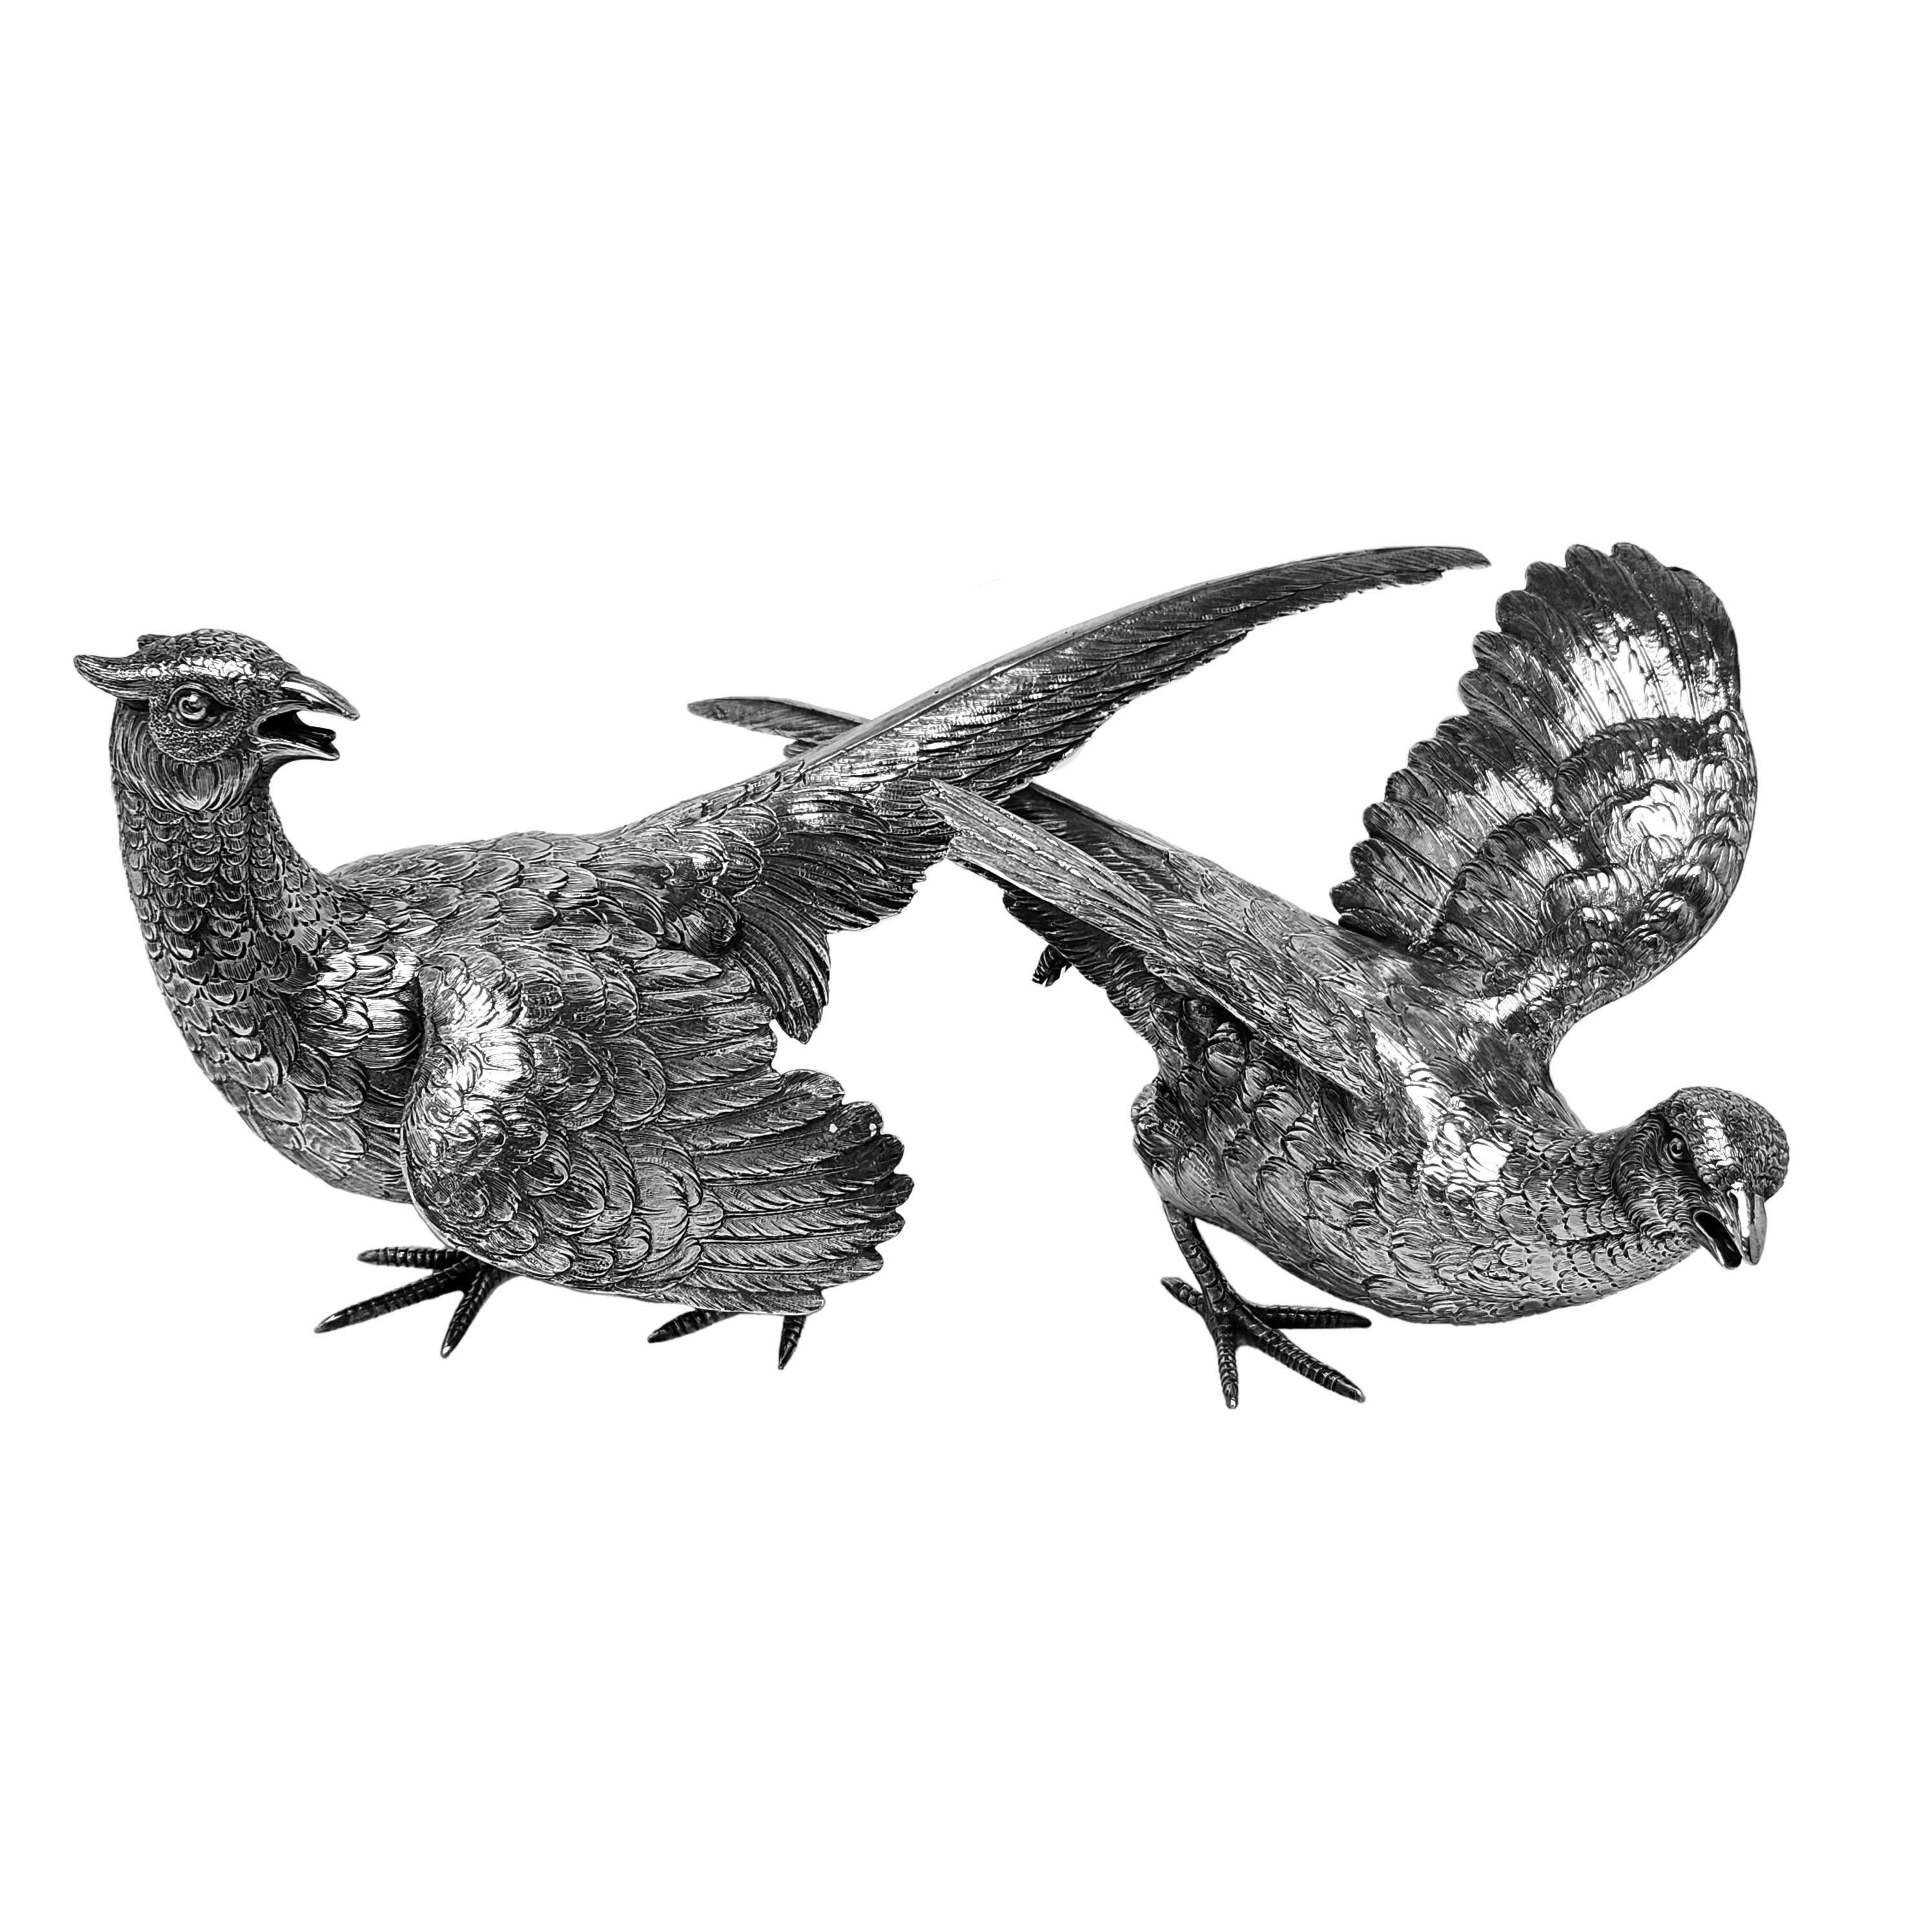 A pair of Antique Solid Silver Pheasants made in a classic style with a lovely attention to detail. The pair consists of a Cock Pheasant and a Hen Pheasant, each unique and modelled in individual poses.

Made in Germany in c. 1900.

Total Weight -